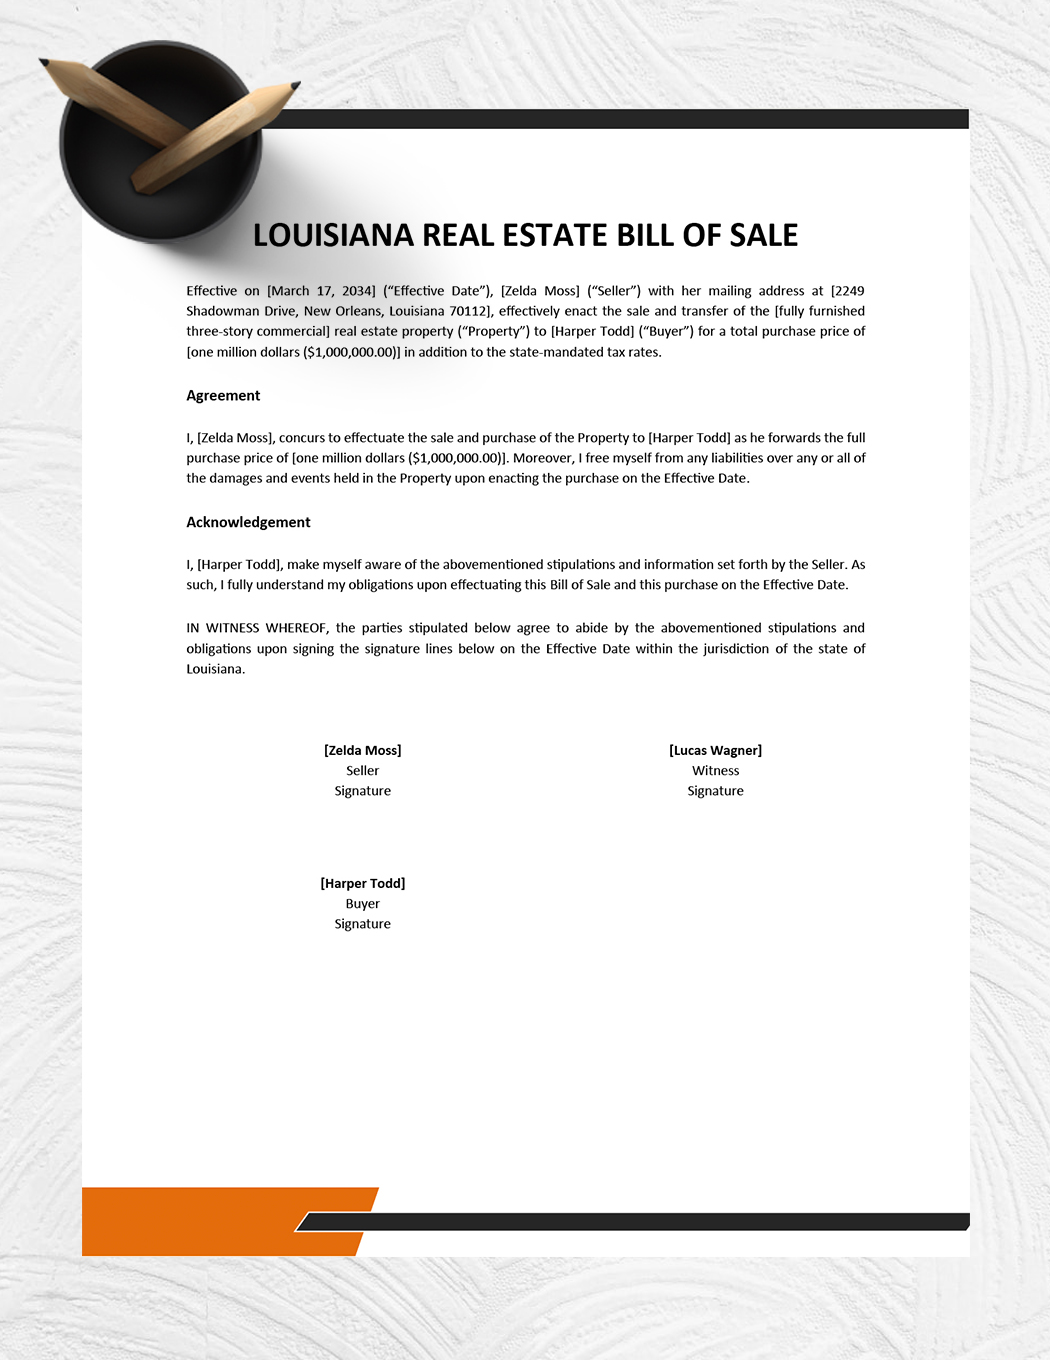 Louisiana Real Estate Bill of Sale Form Template Download in Word